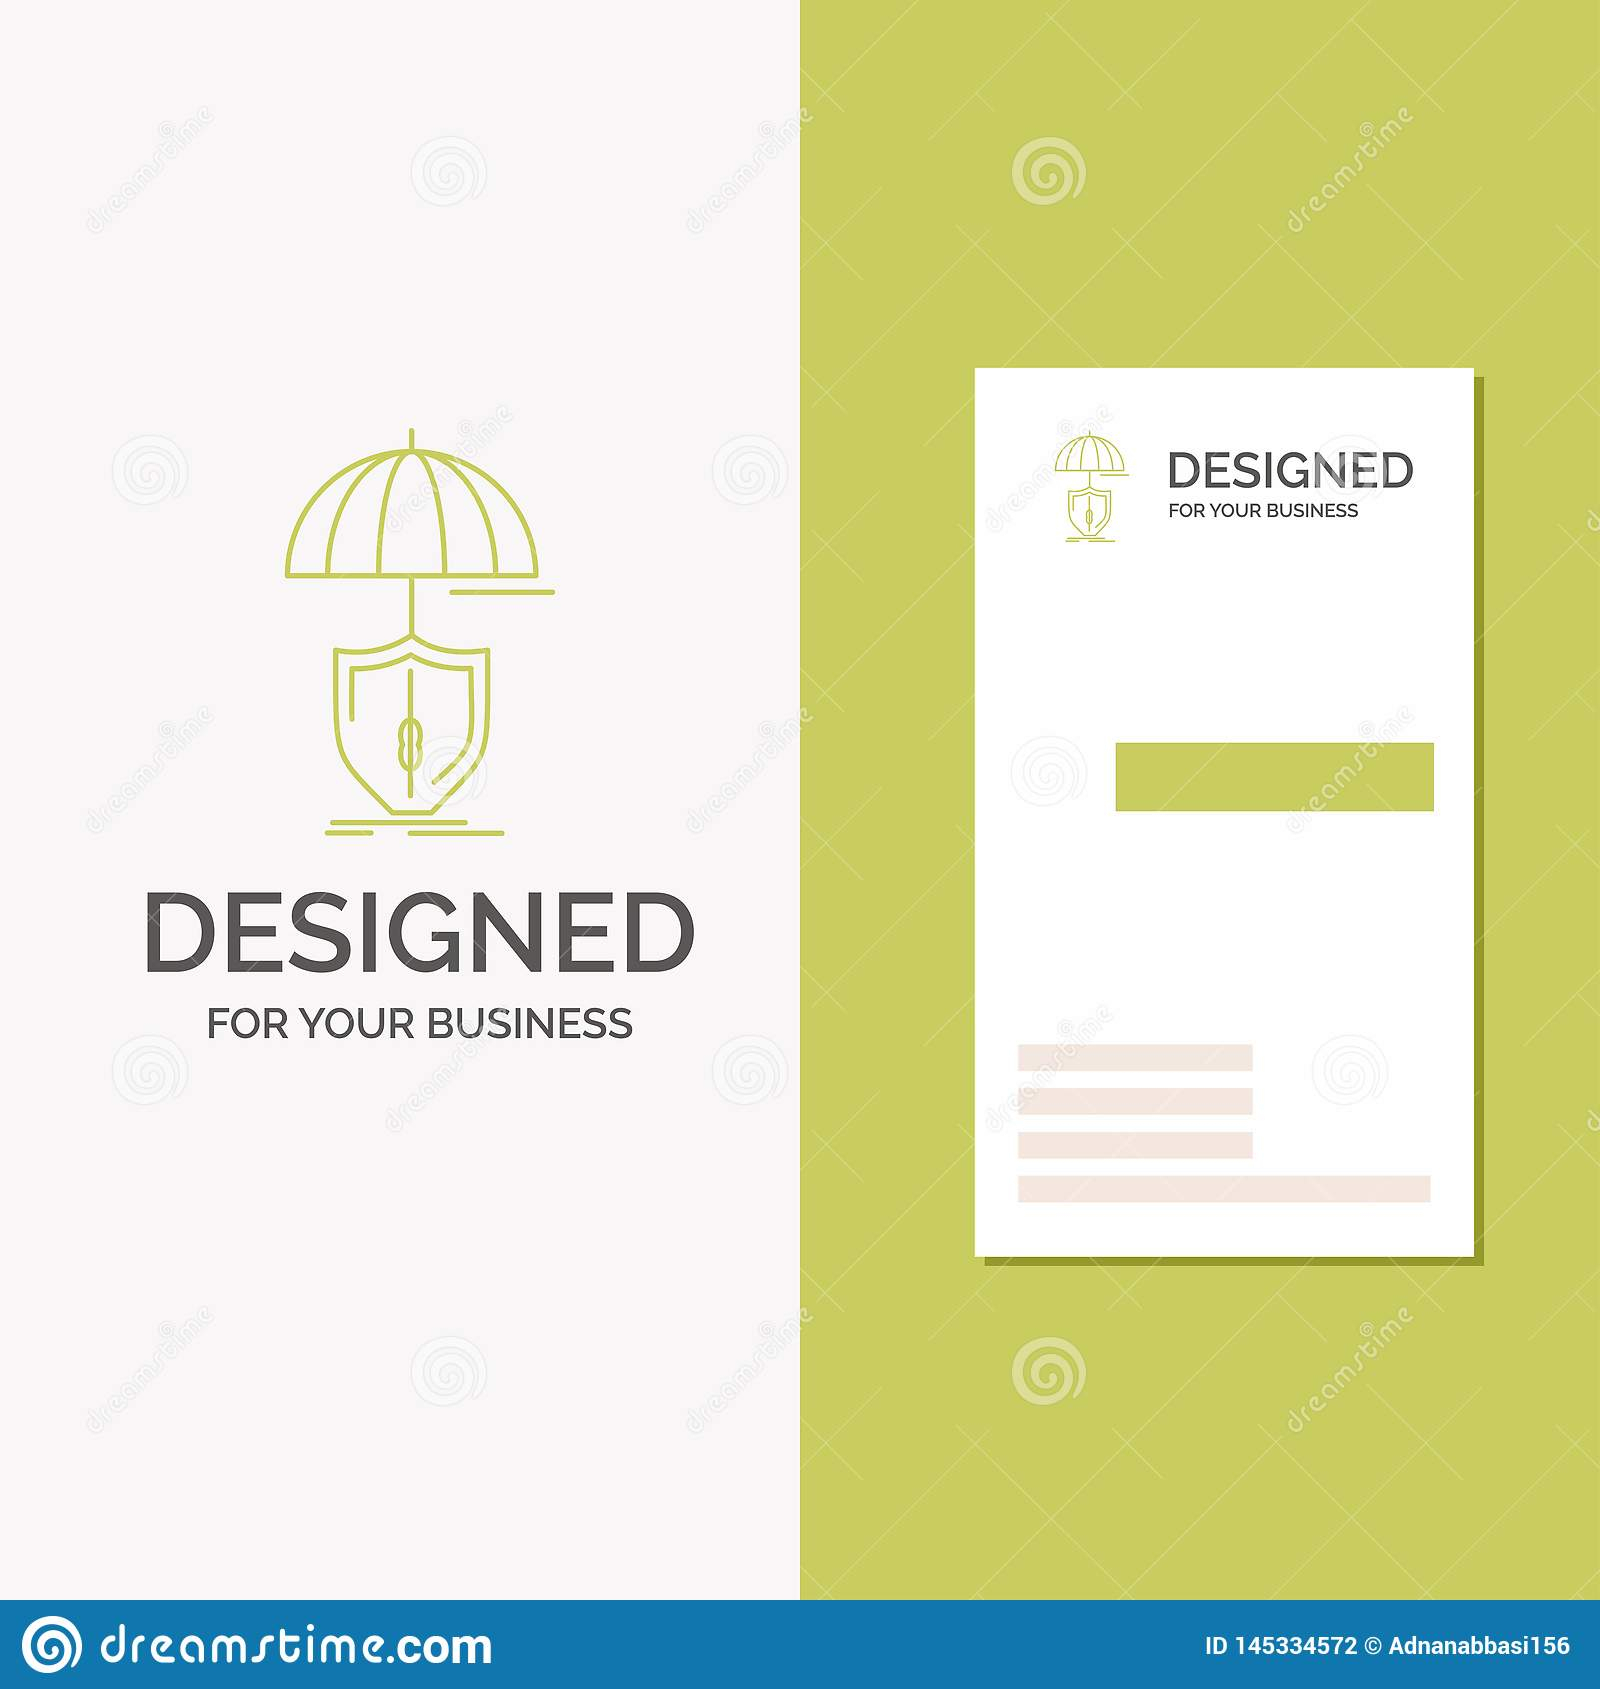 Business Logo For Insurance, Protection, Safety, Digital Intended For Insurance Id Card Template